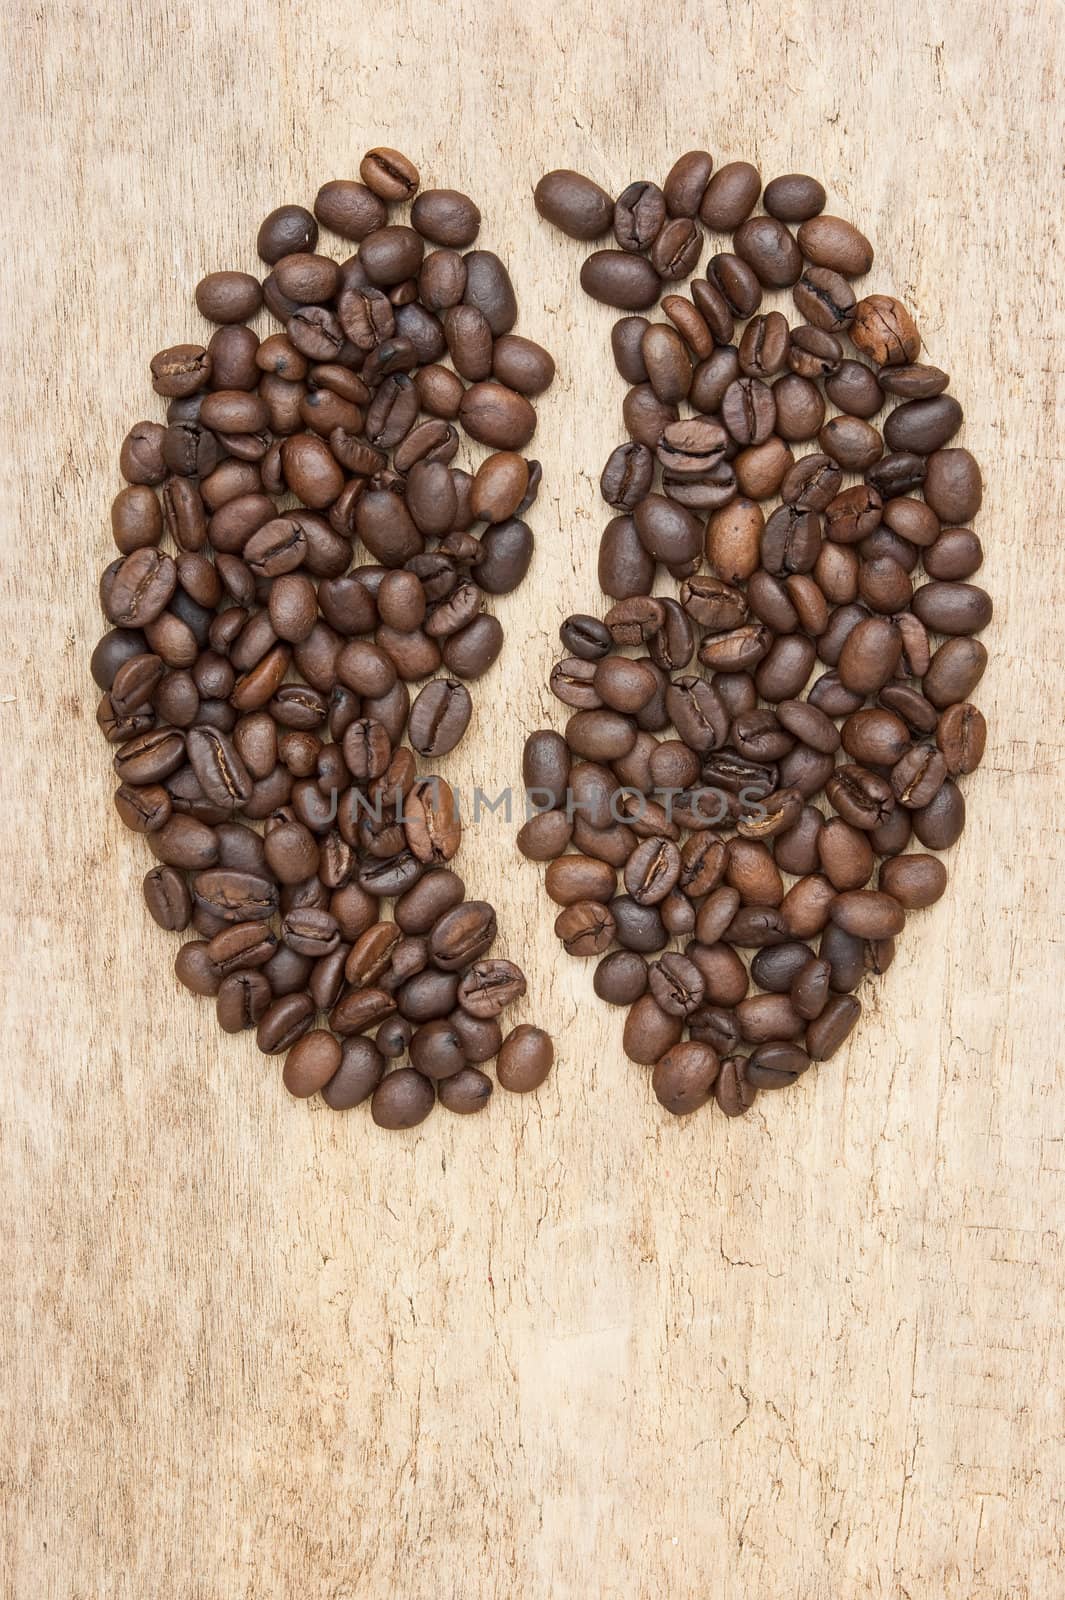 The image is laid out coffee beans on the background of the old board